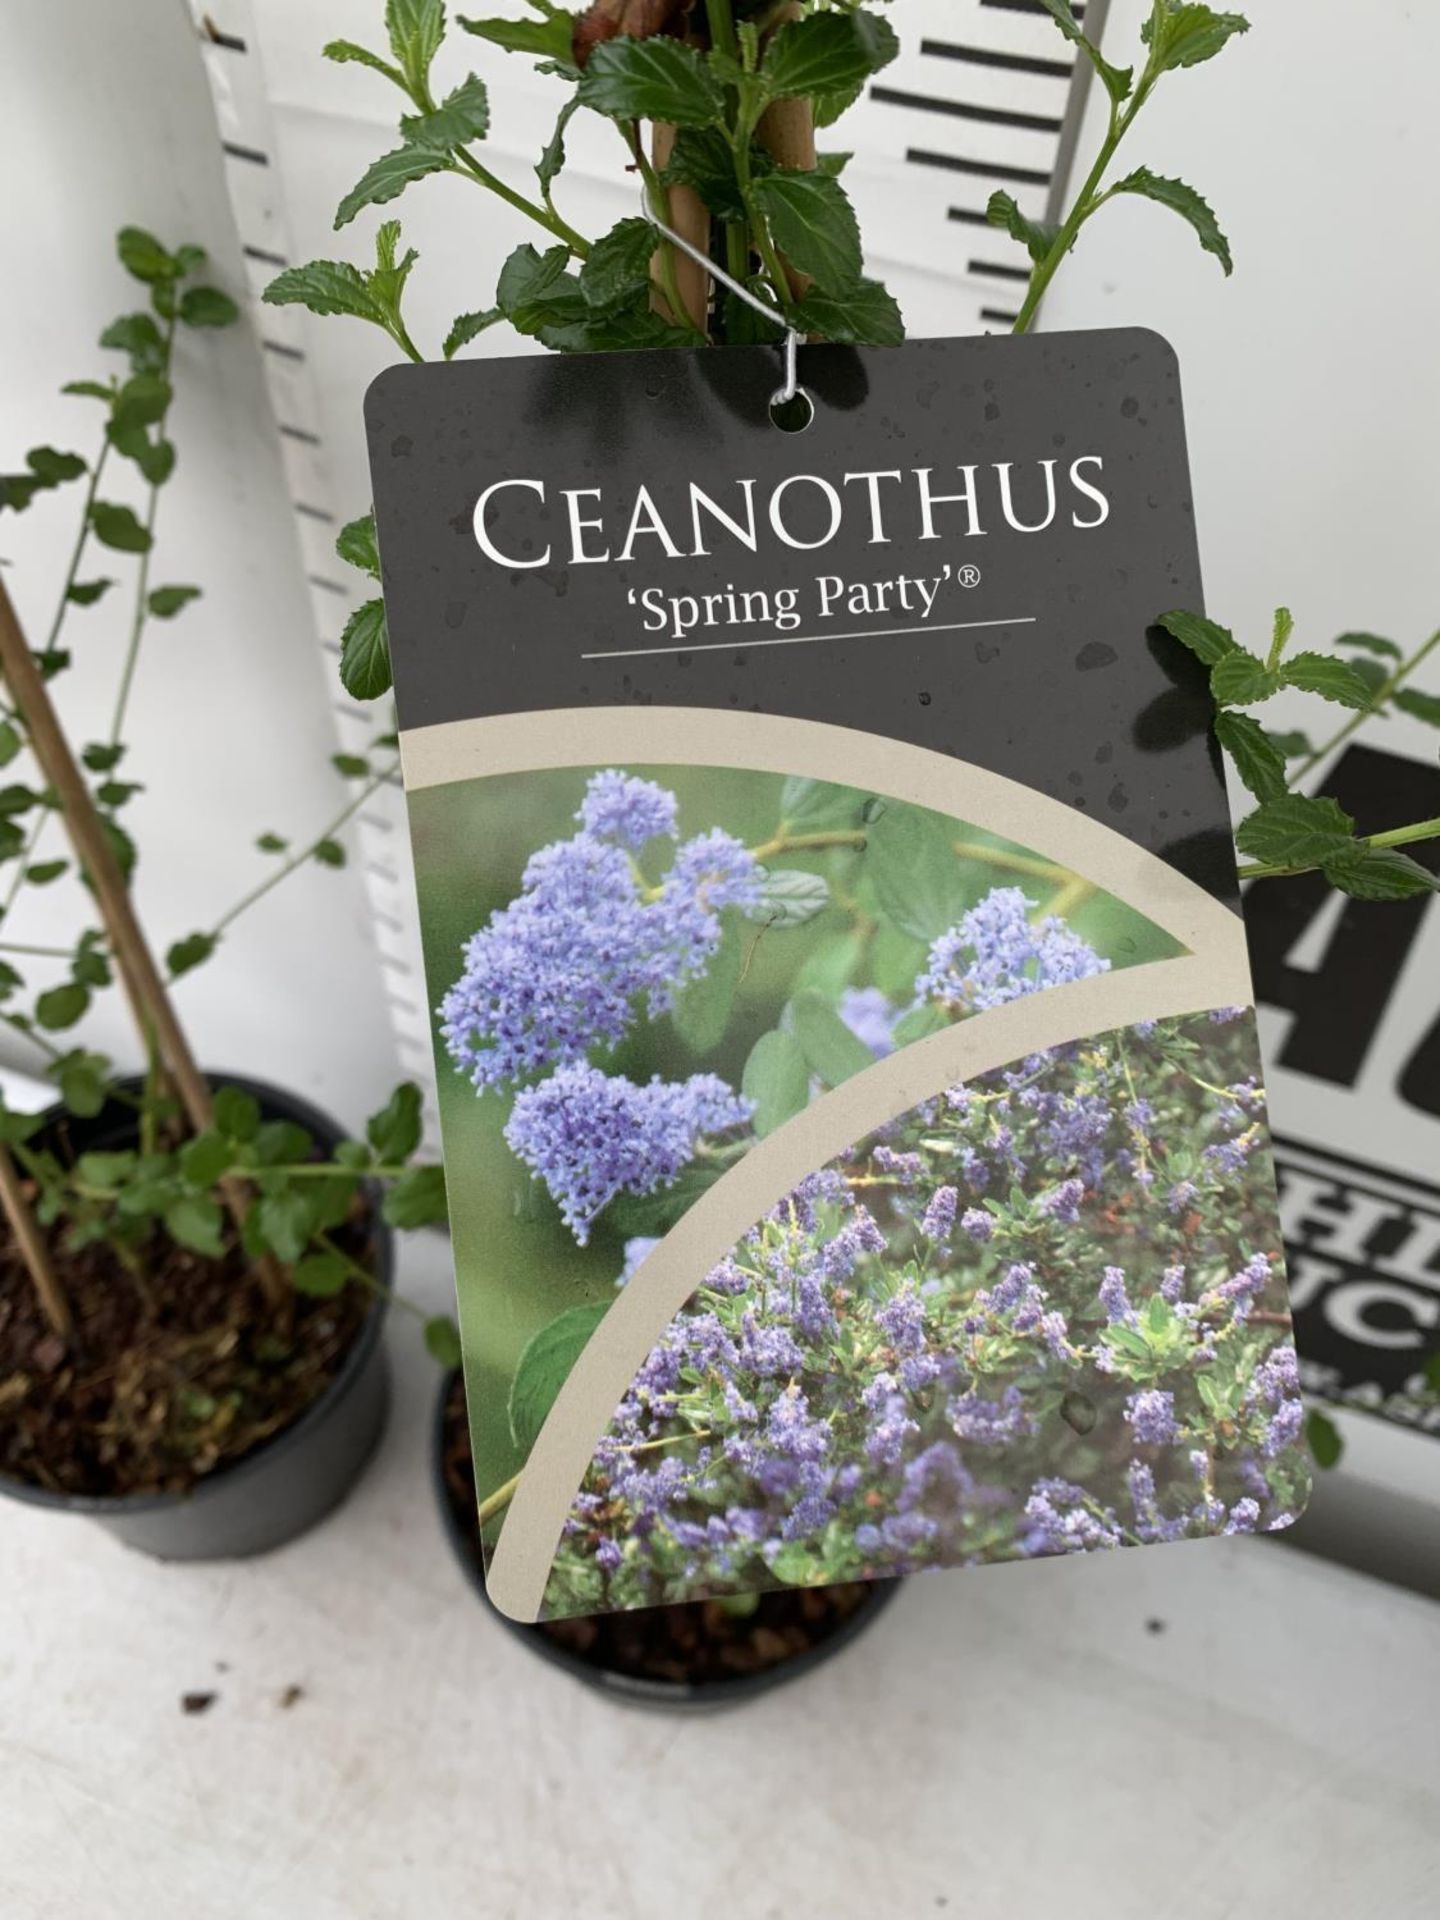 TWO CEANOTHUS 'SPRING PARTY' IN A 2 LTR POT ON A PYRAMID FRAME 90CM TALL PLUS VAT TO BE SOLD FOR THE - Image 4 of 7